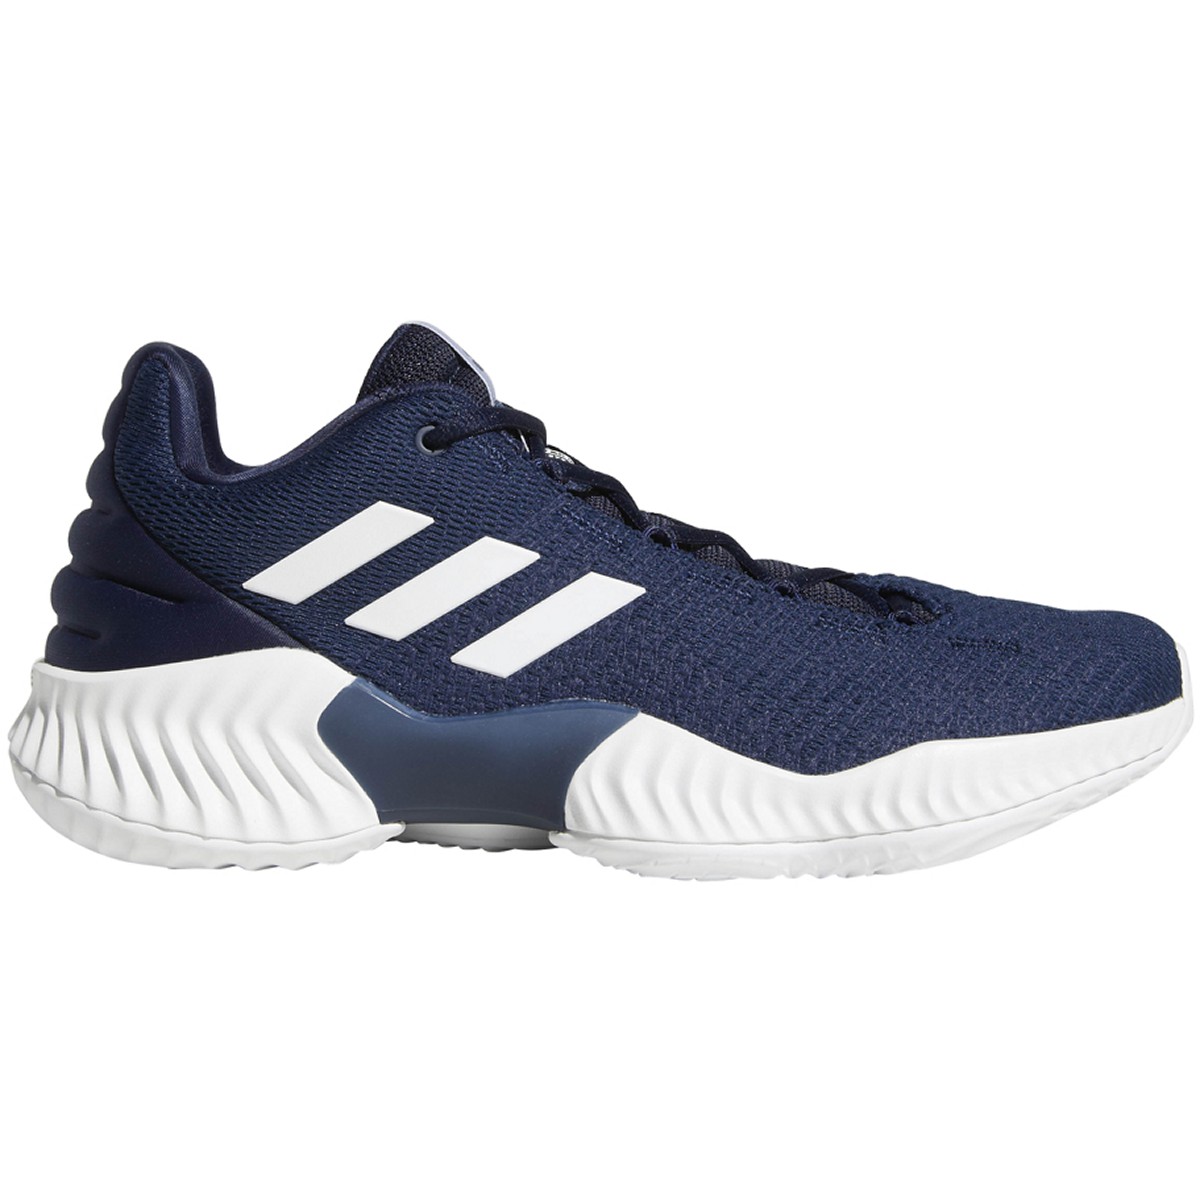 Mainstream folder Exclusion Adidas Pro Bounce 2018 Low Men's Basketball Shoes Navy-White ah2677